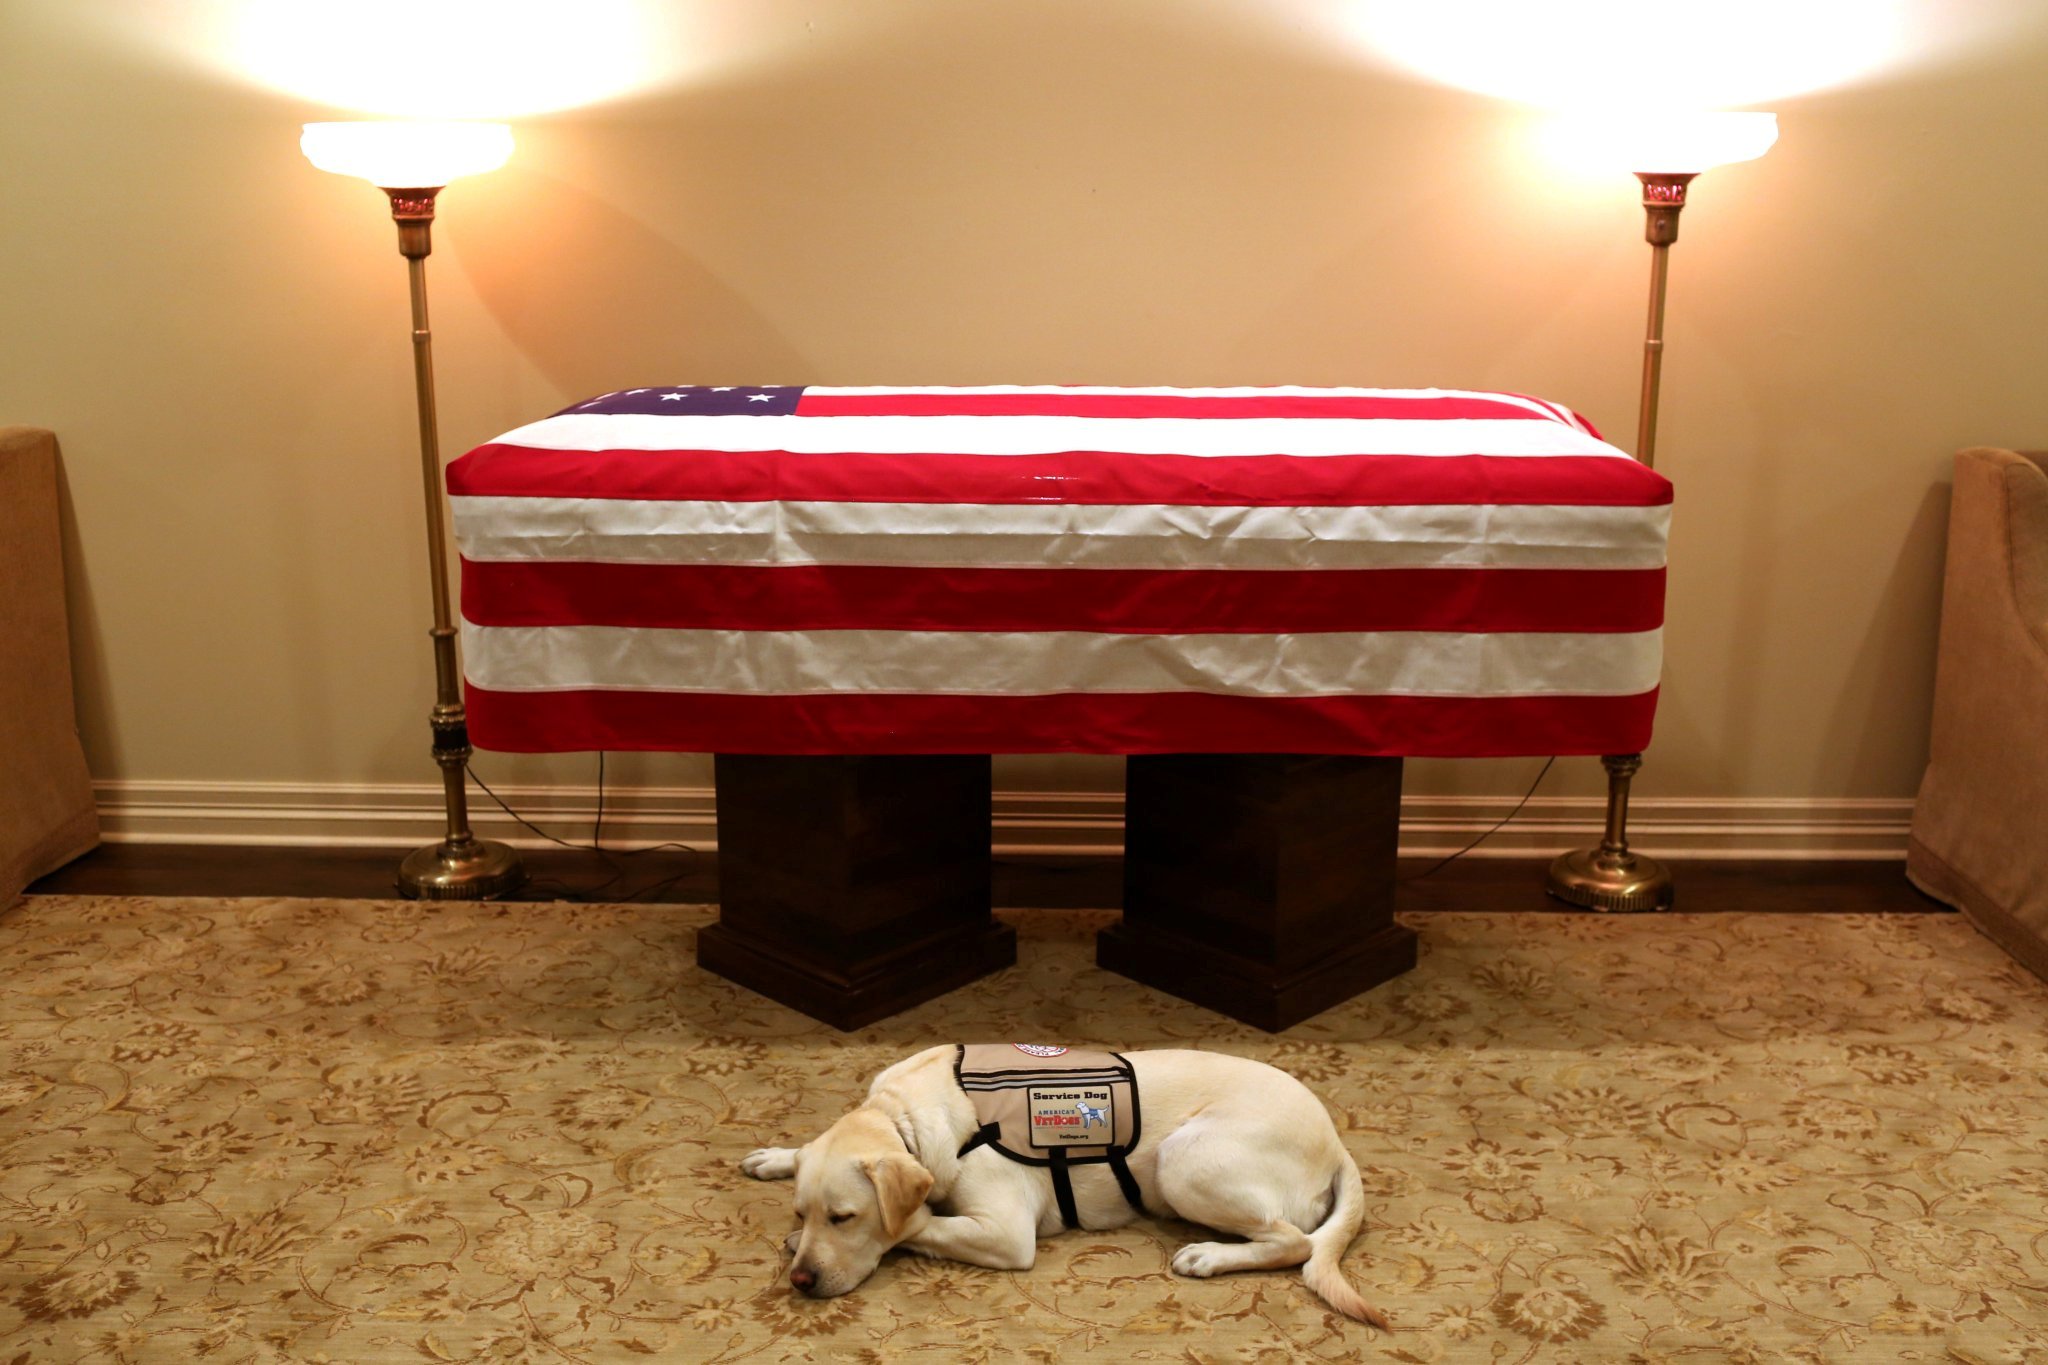 Sully, the service dog of former U.S. President George H.W. Bush in his final months, lays in front of Bush's casket at the George H. Lewis & Sons funeral home in Houston, Texas, U.S., December 3, 2018. (Courtesy Office of George H. W. Bush-Evan Sisley/Handout)